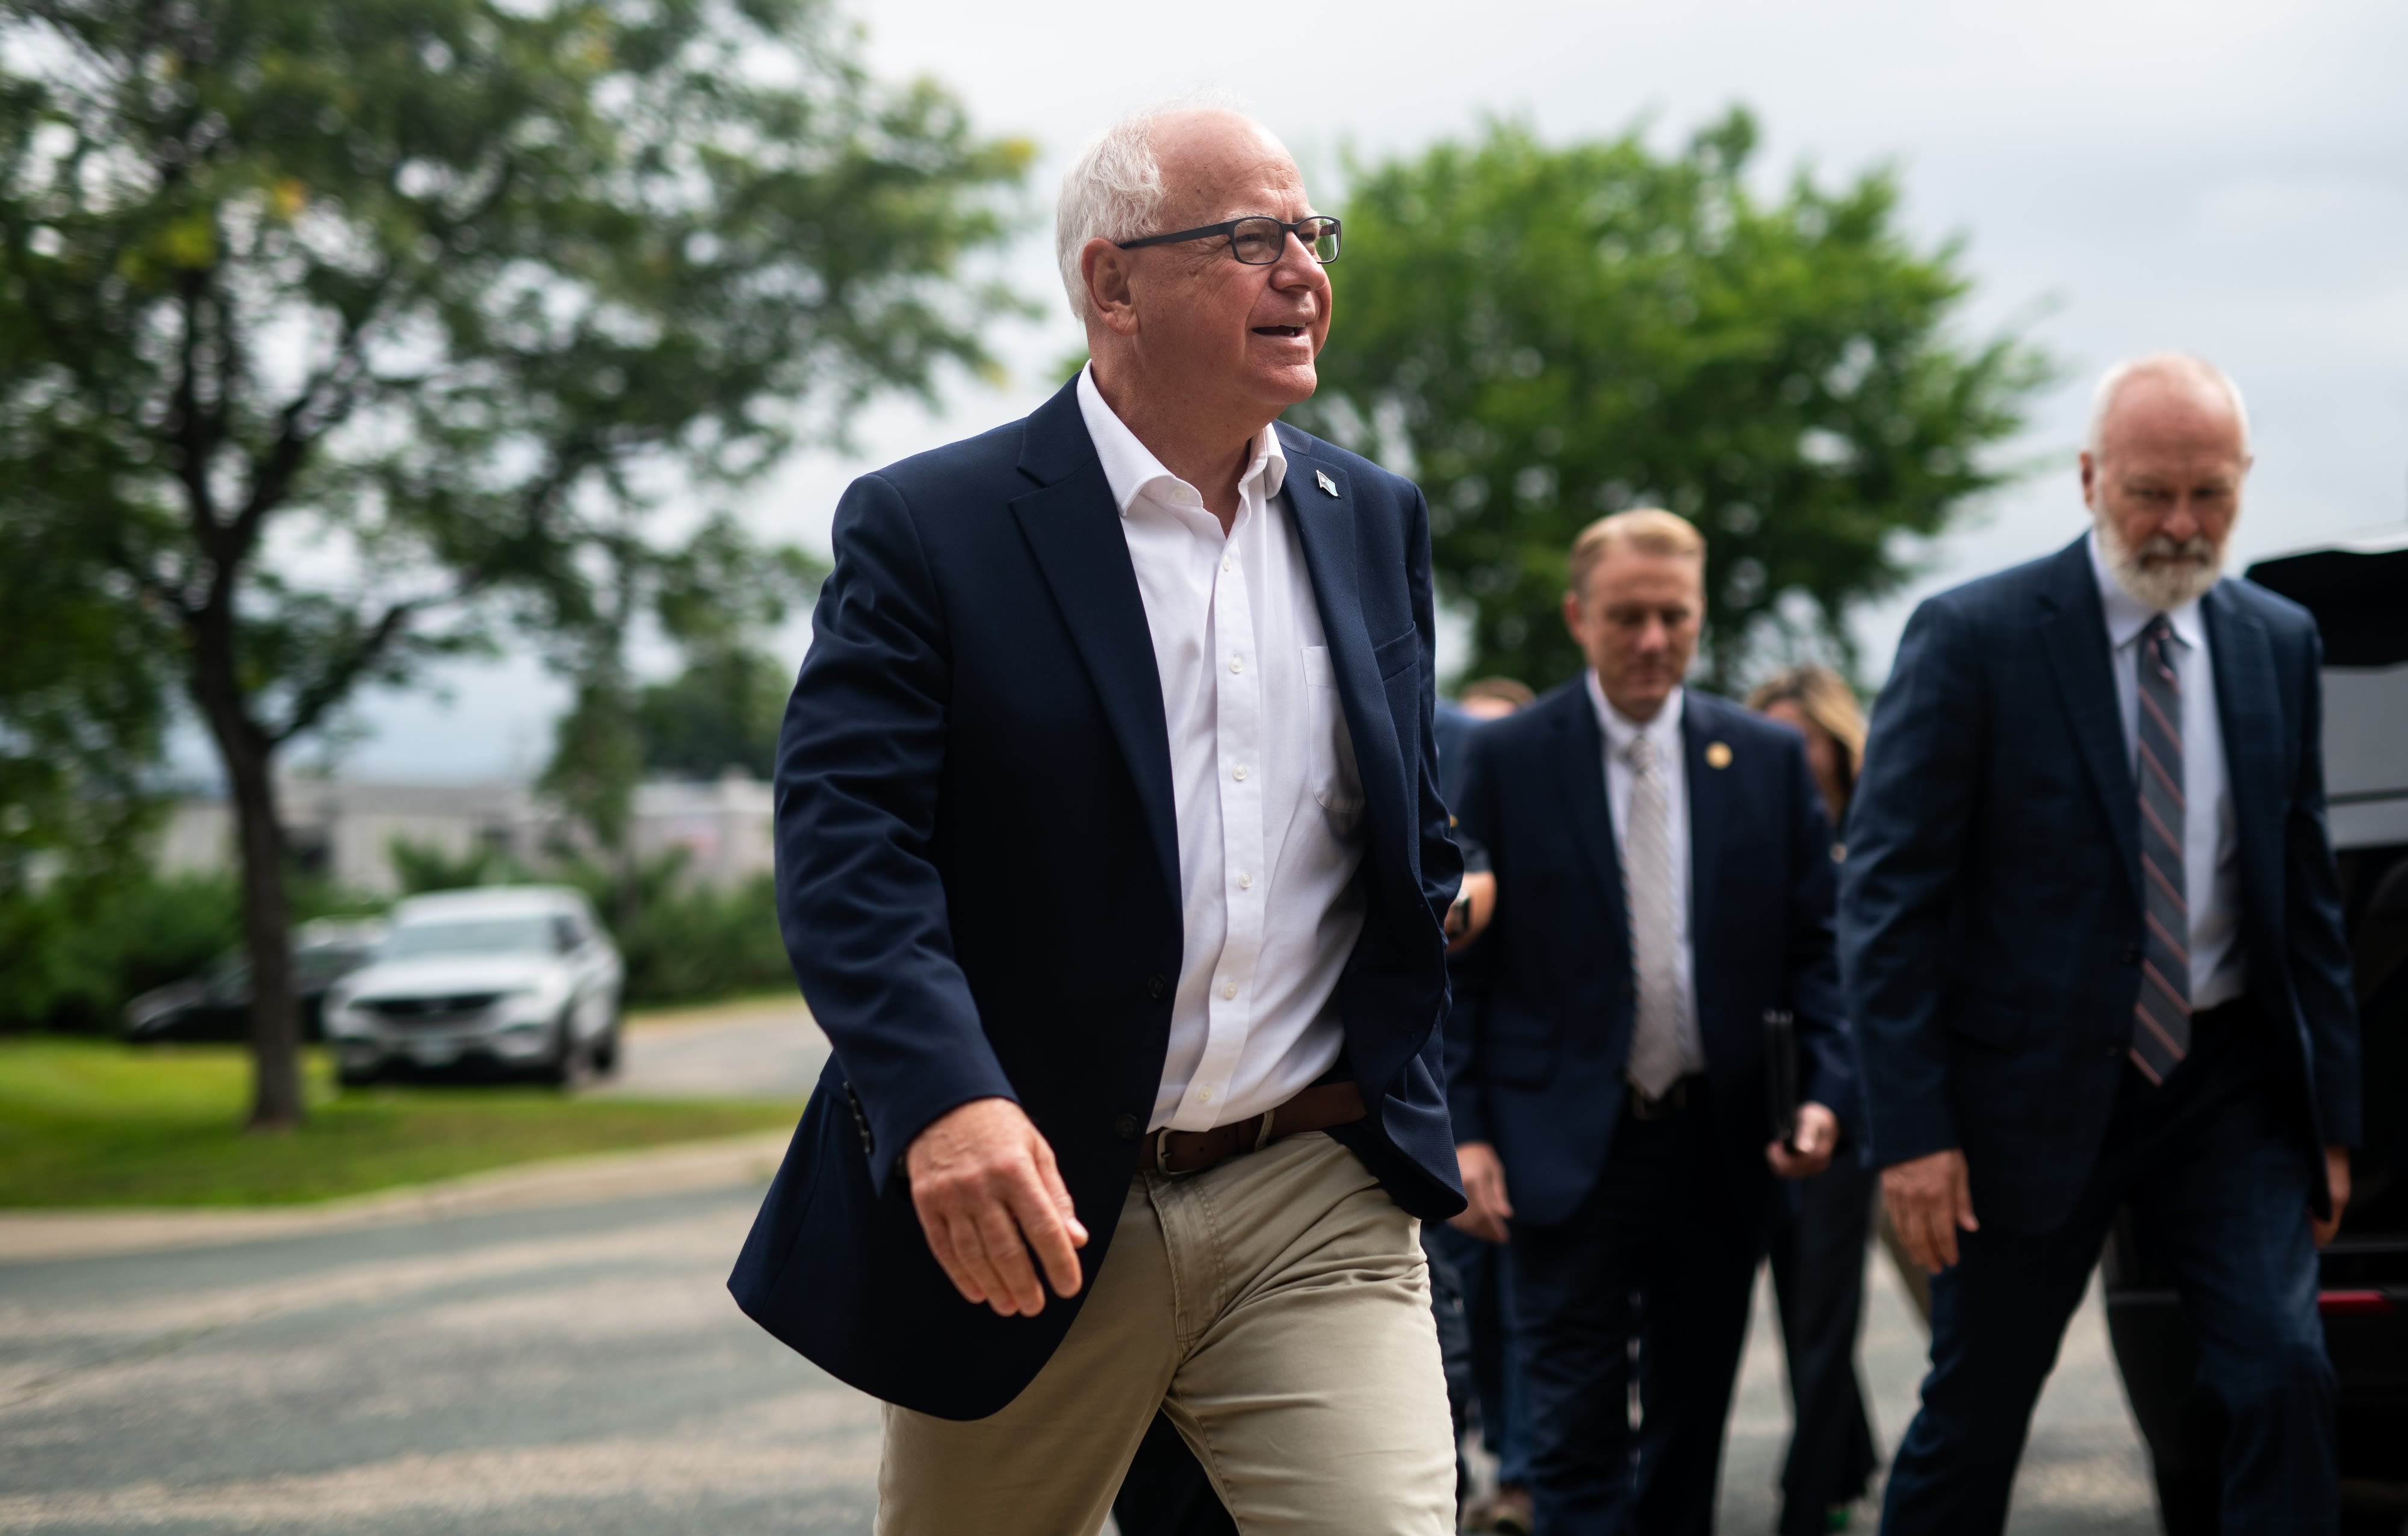 Tim Walz’s journey from high school football coach to VP candidate